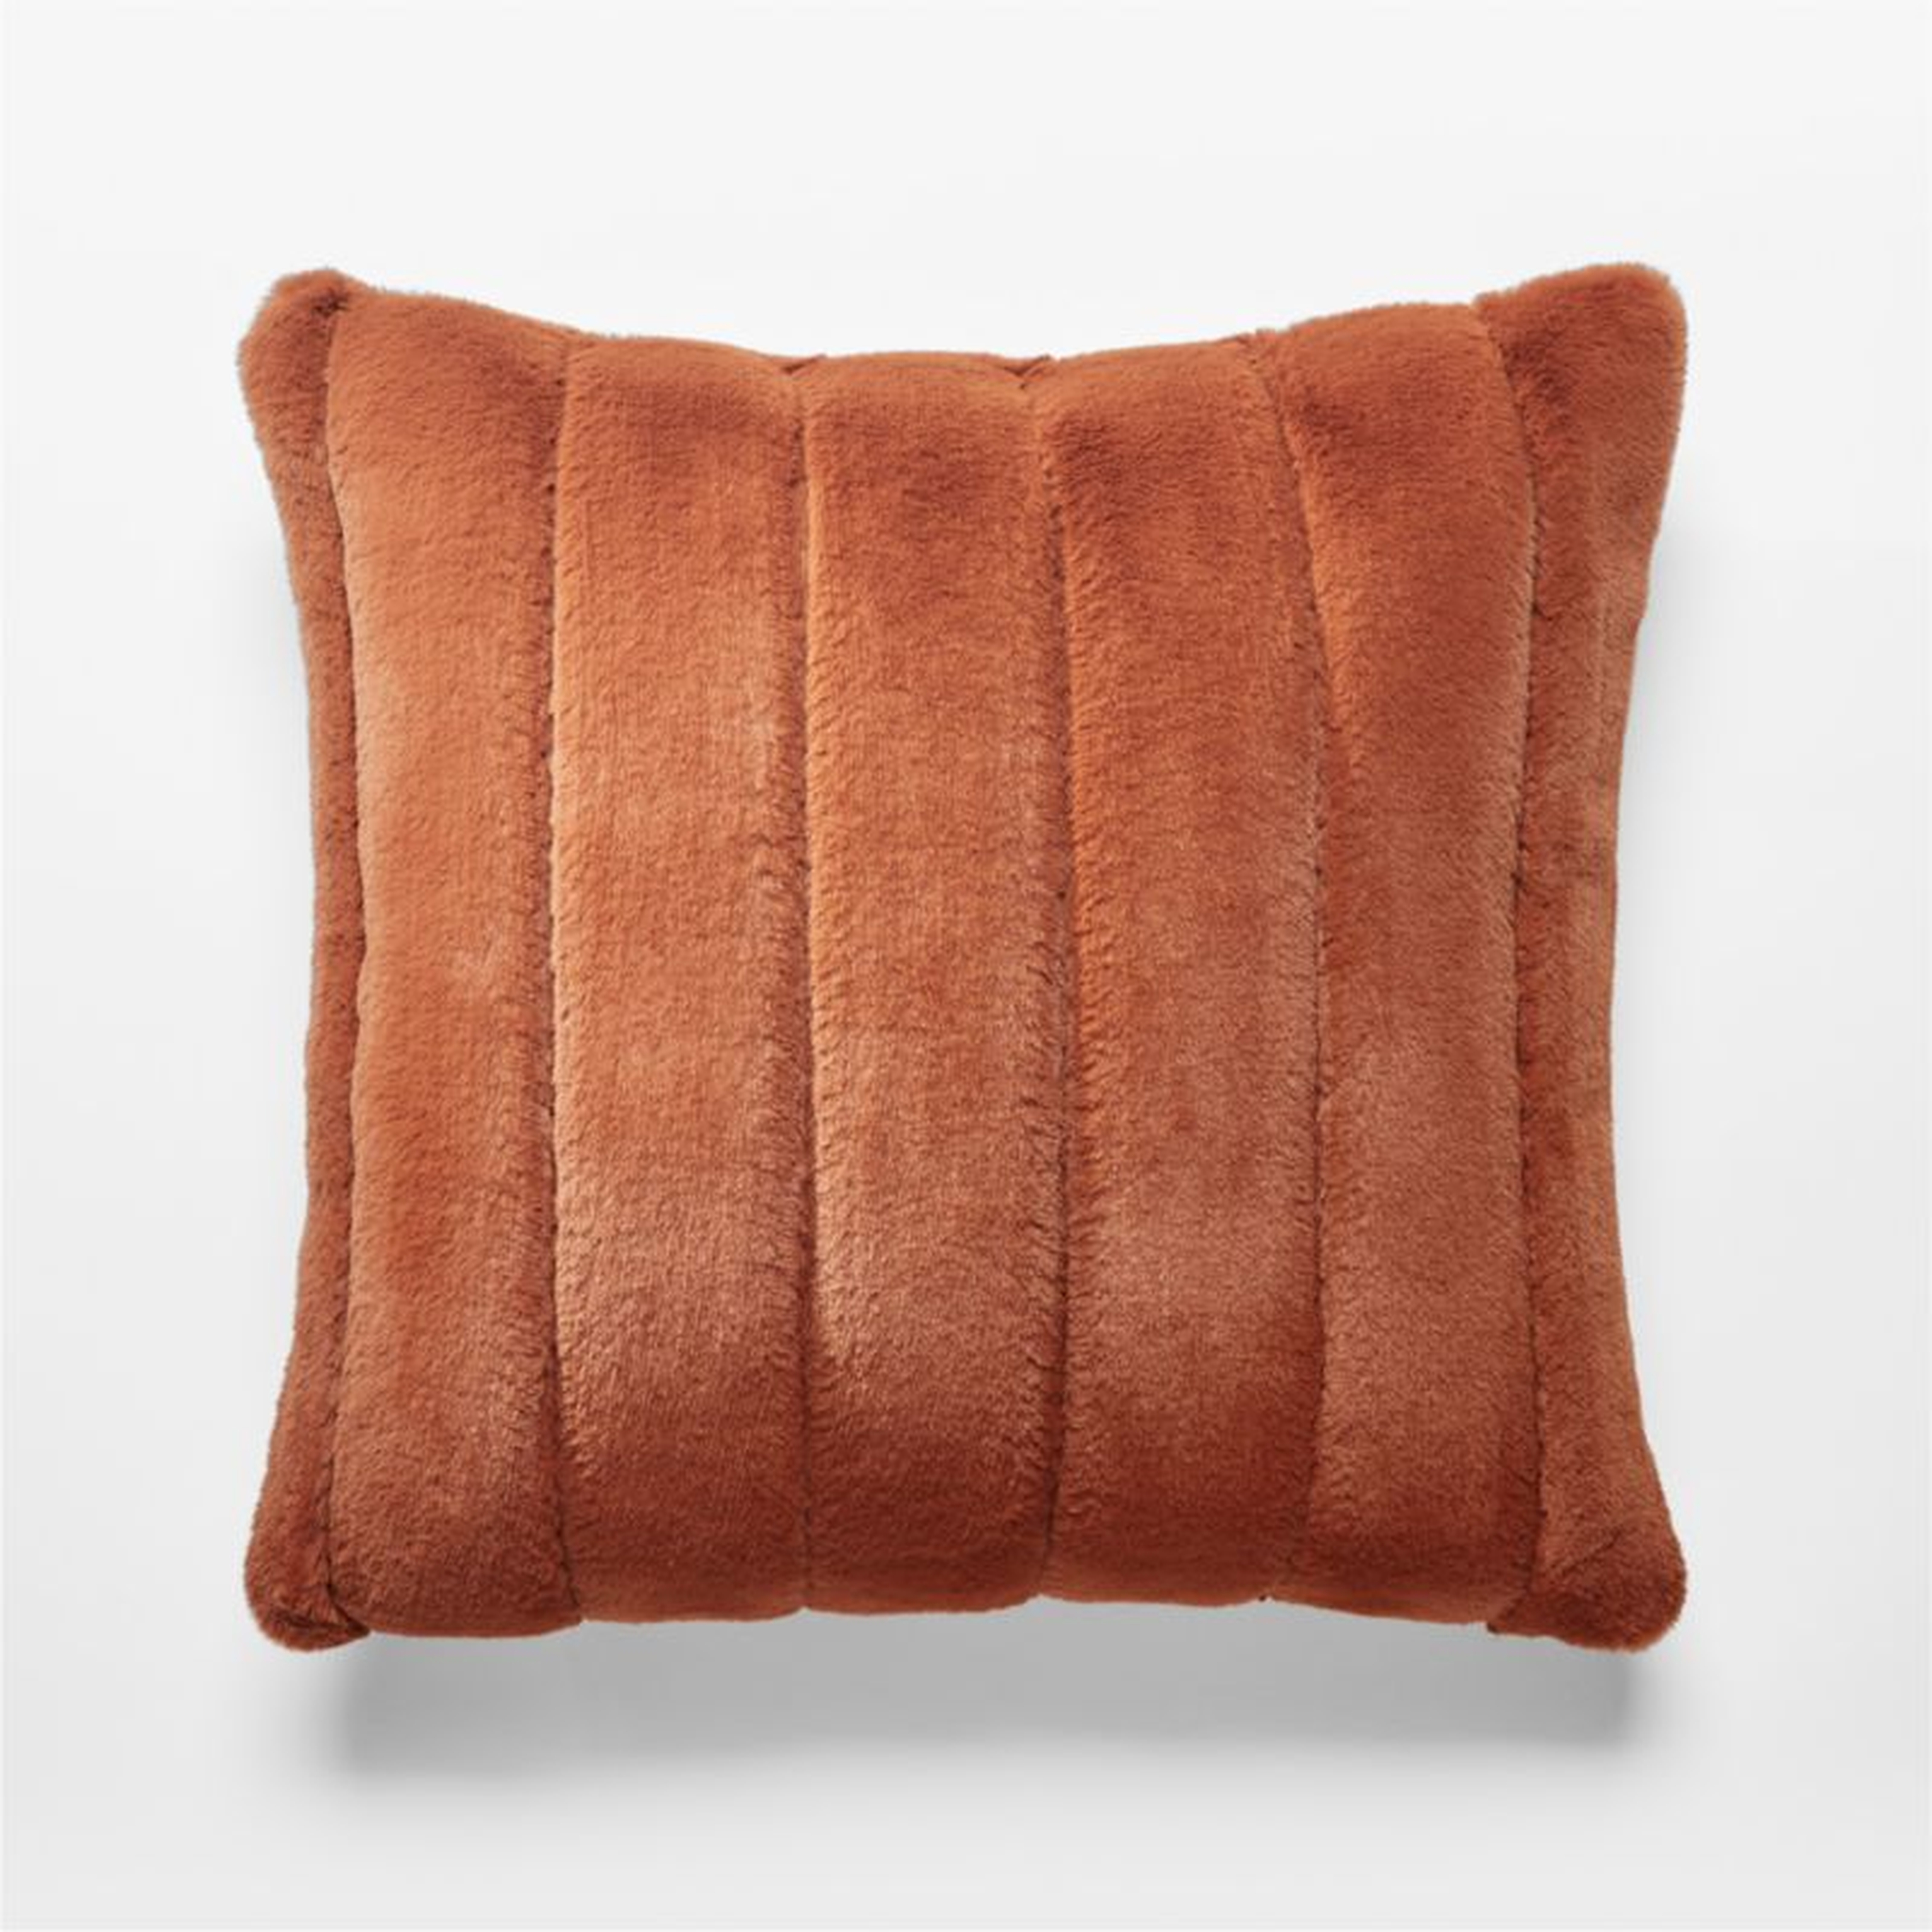 Channel Faux Fur Rust Pillow, Feather-Down Insert, 18" x 18" - CB2